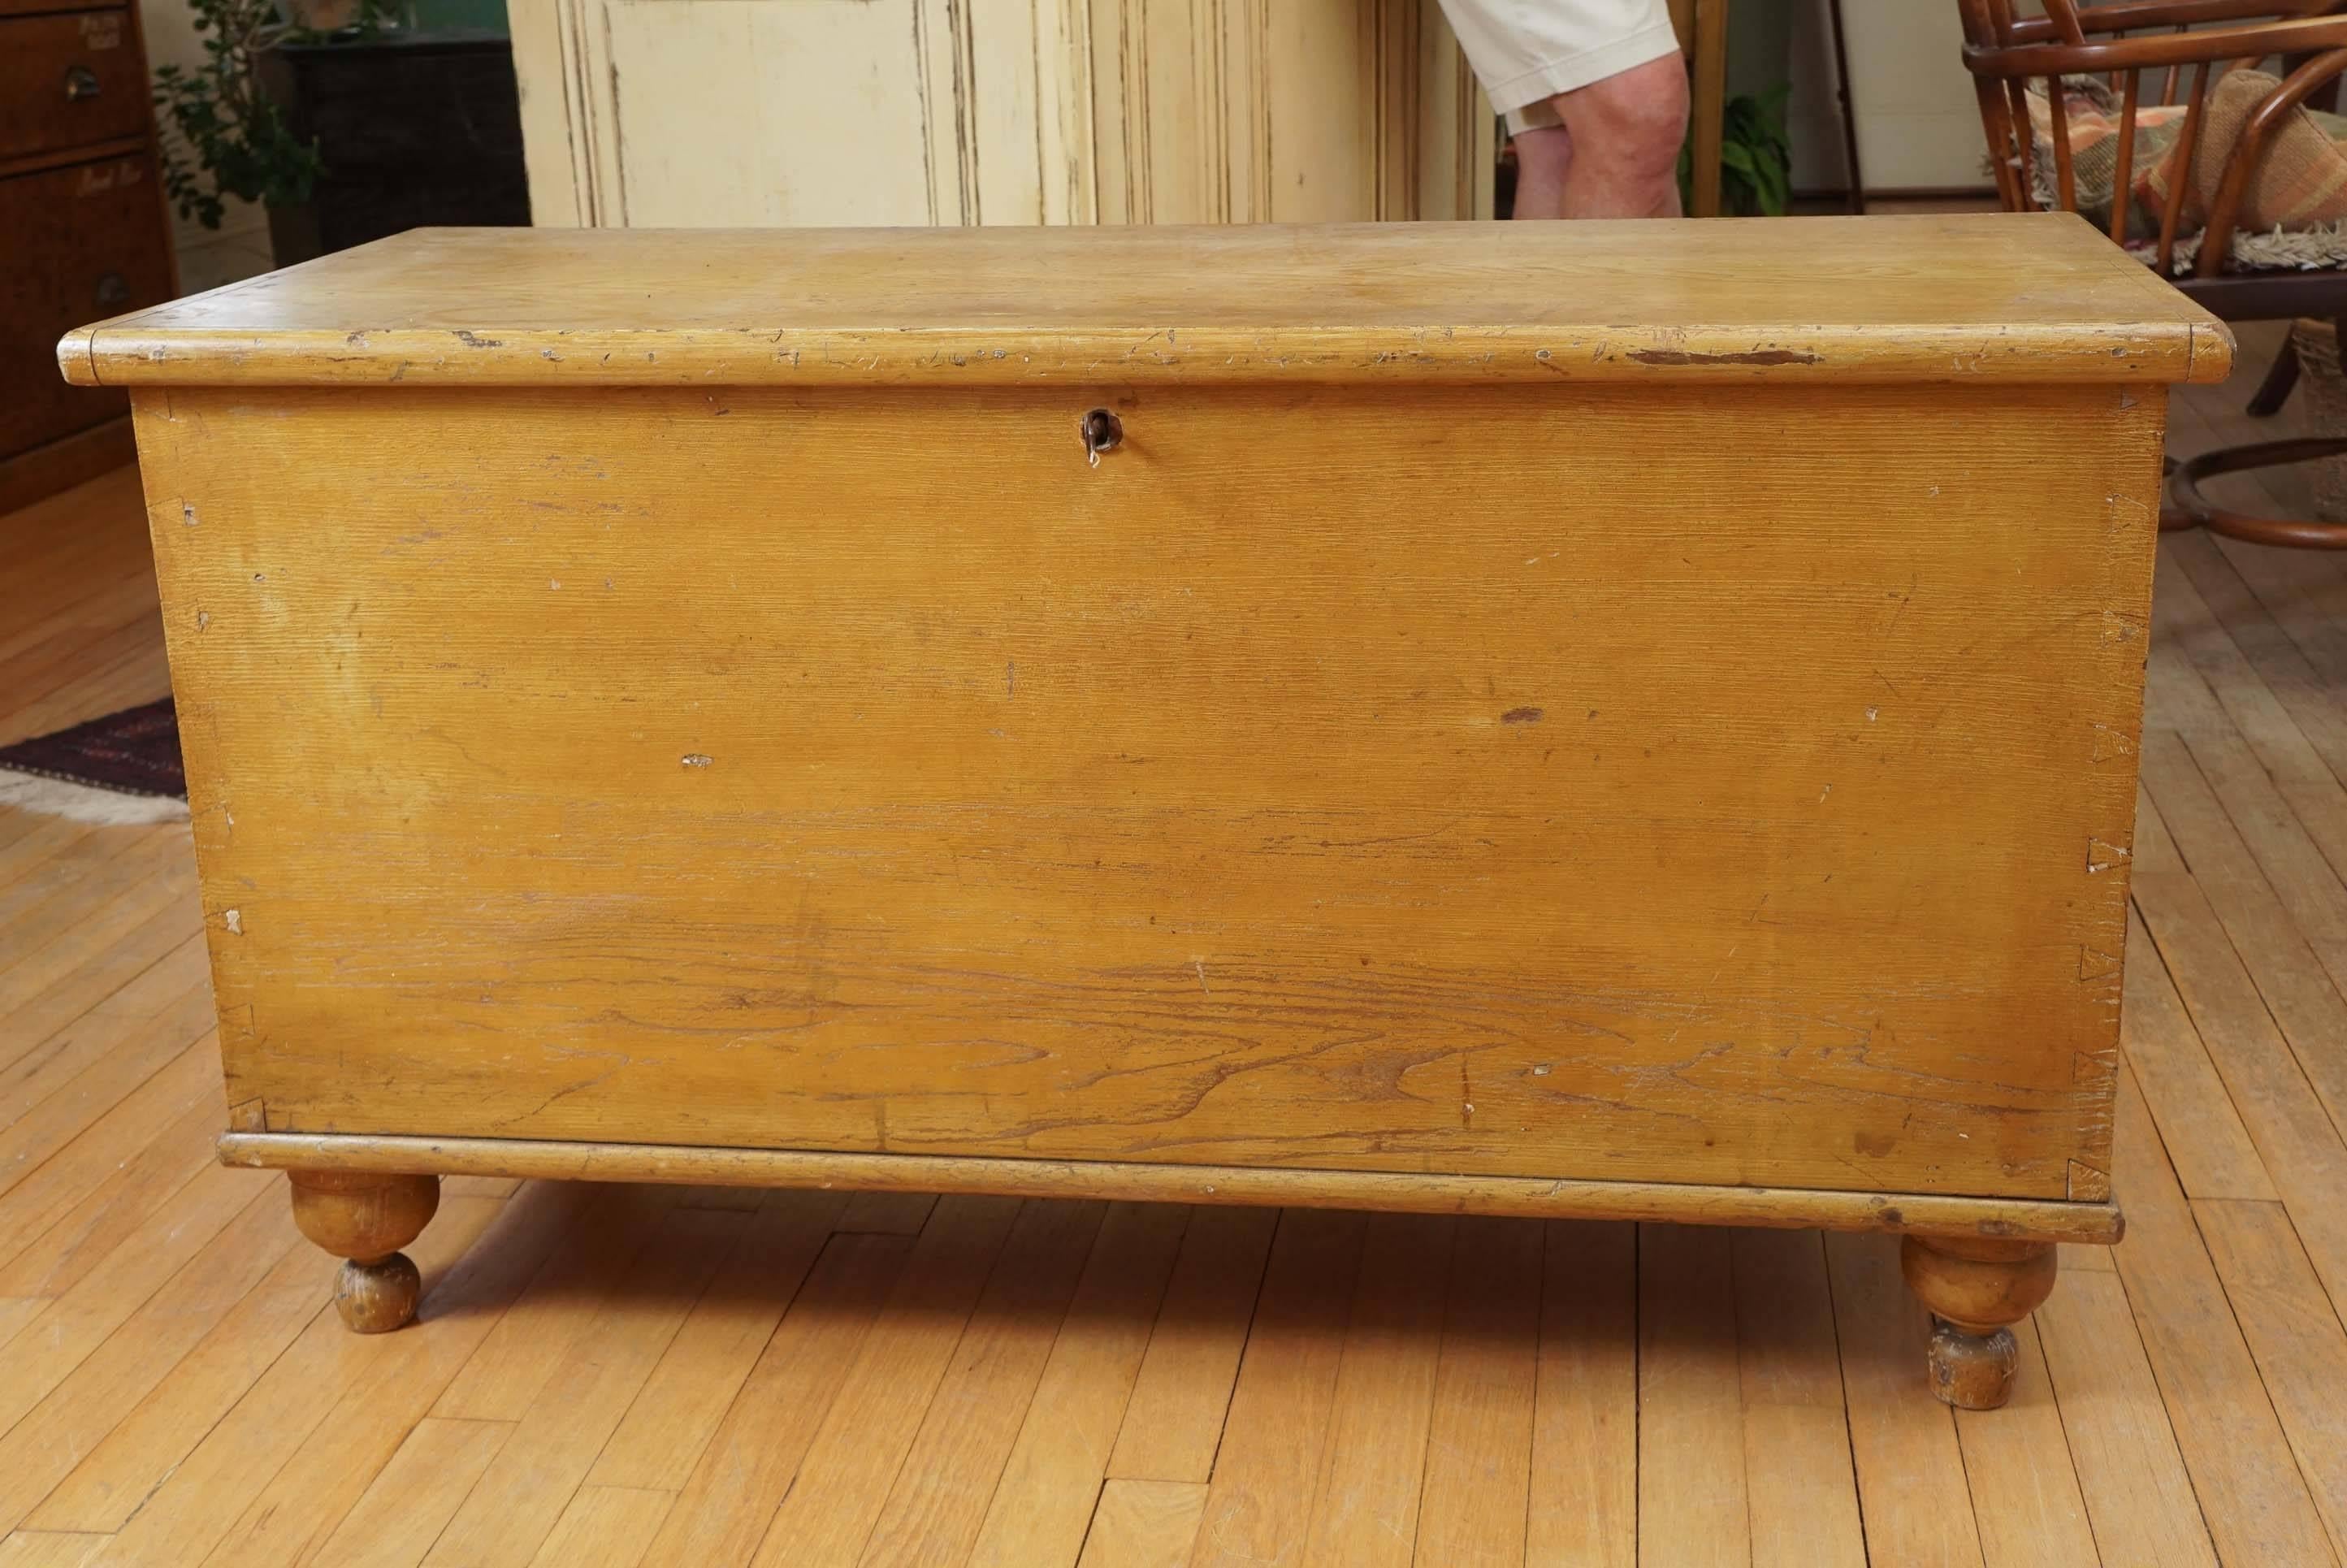 While we like blanket chests for coffee tables we love blanket chests that would look great at the foot of a bed and this one is large enough to qualify. Totally original with great feet, original hinges and a candle box inside there is plenty of